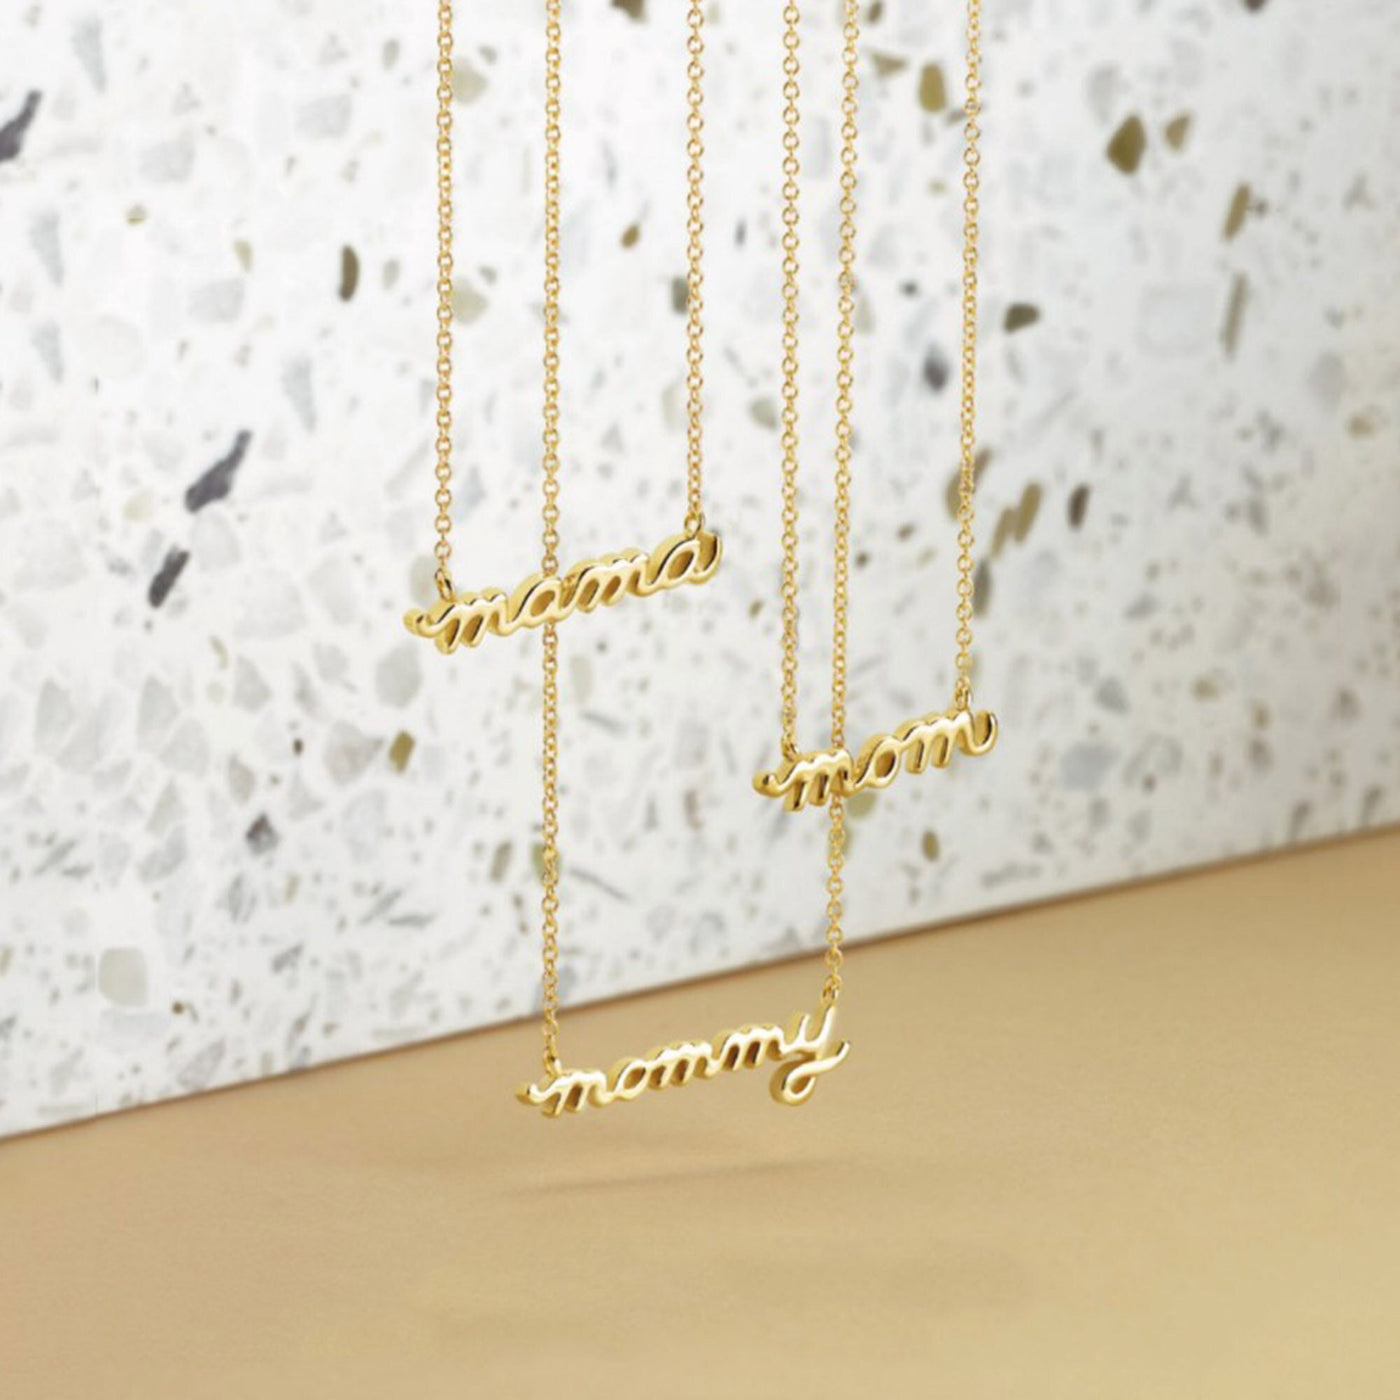 Mom, Mama, Mommy Necklace